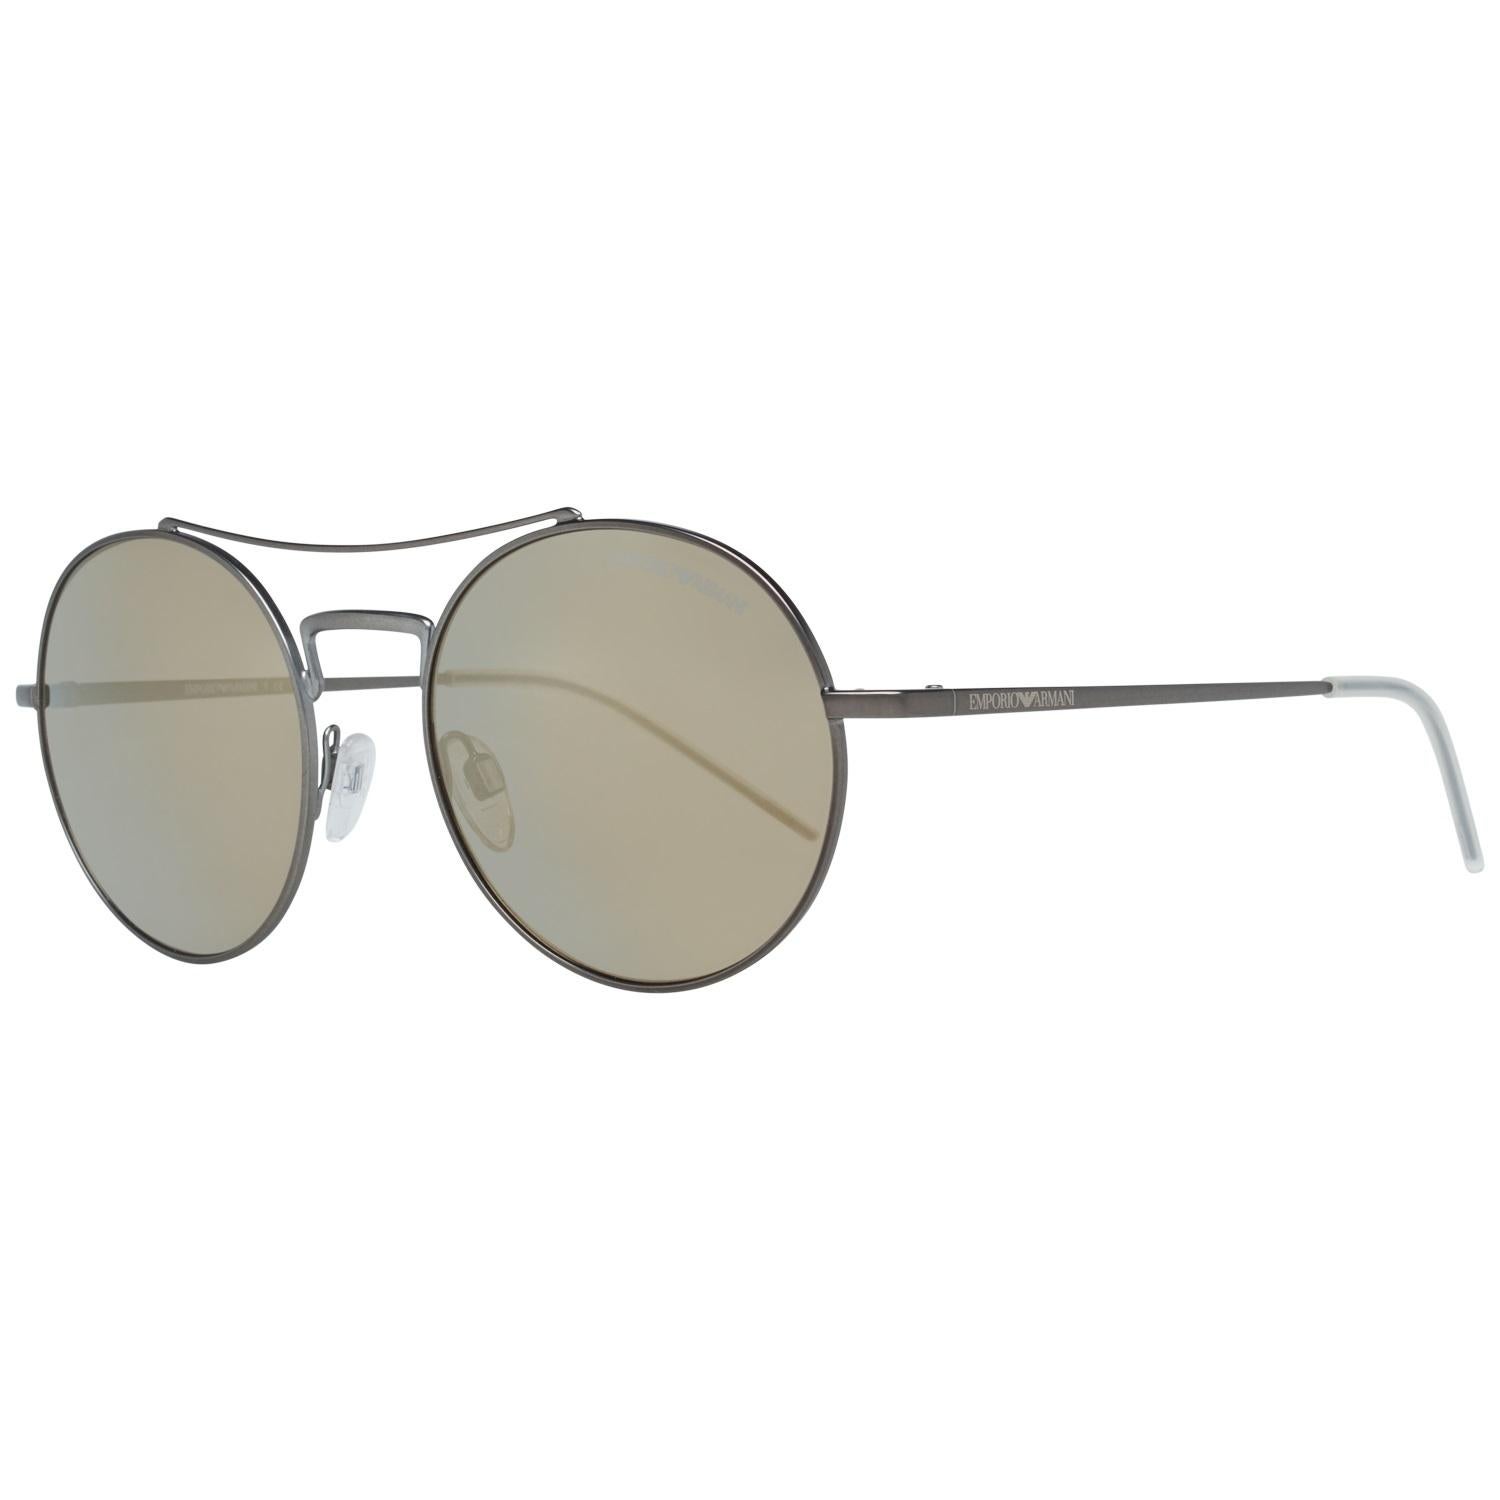 Details

MATERIAL: Metal

COLOR: Silver

MODEL: EA2061 30035A52

GENDER: Adult Unisex

COUNTRY OF MANUFACTURE: Italy

TYPE: Sunglasses

ORIGINAL CASE?: Yes

STYLE: Round

OCCASION: Casual

FEATURES: Lightweight

LENS COLOR: Brown

LENS TECHNOLOGY: